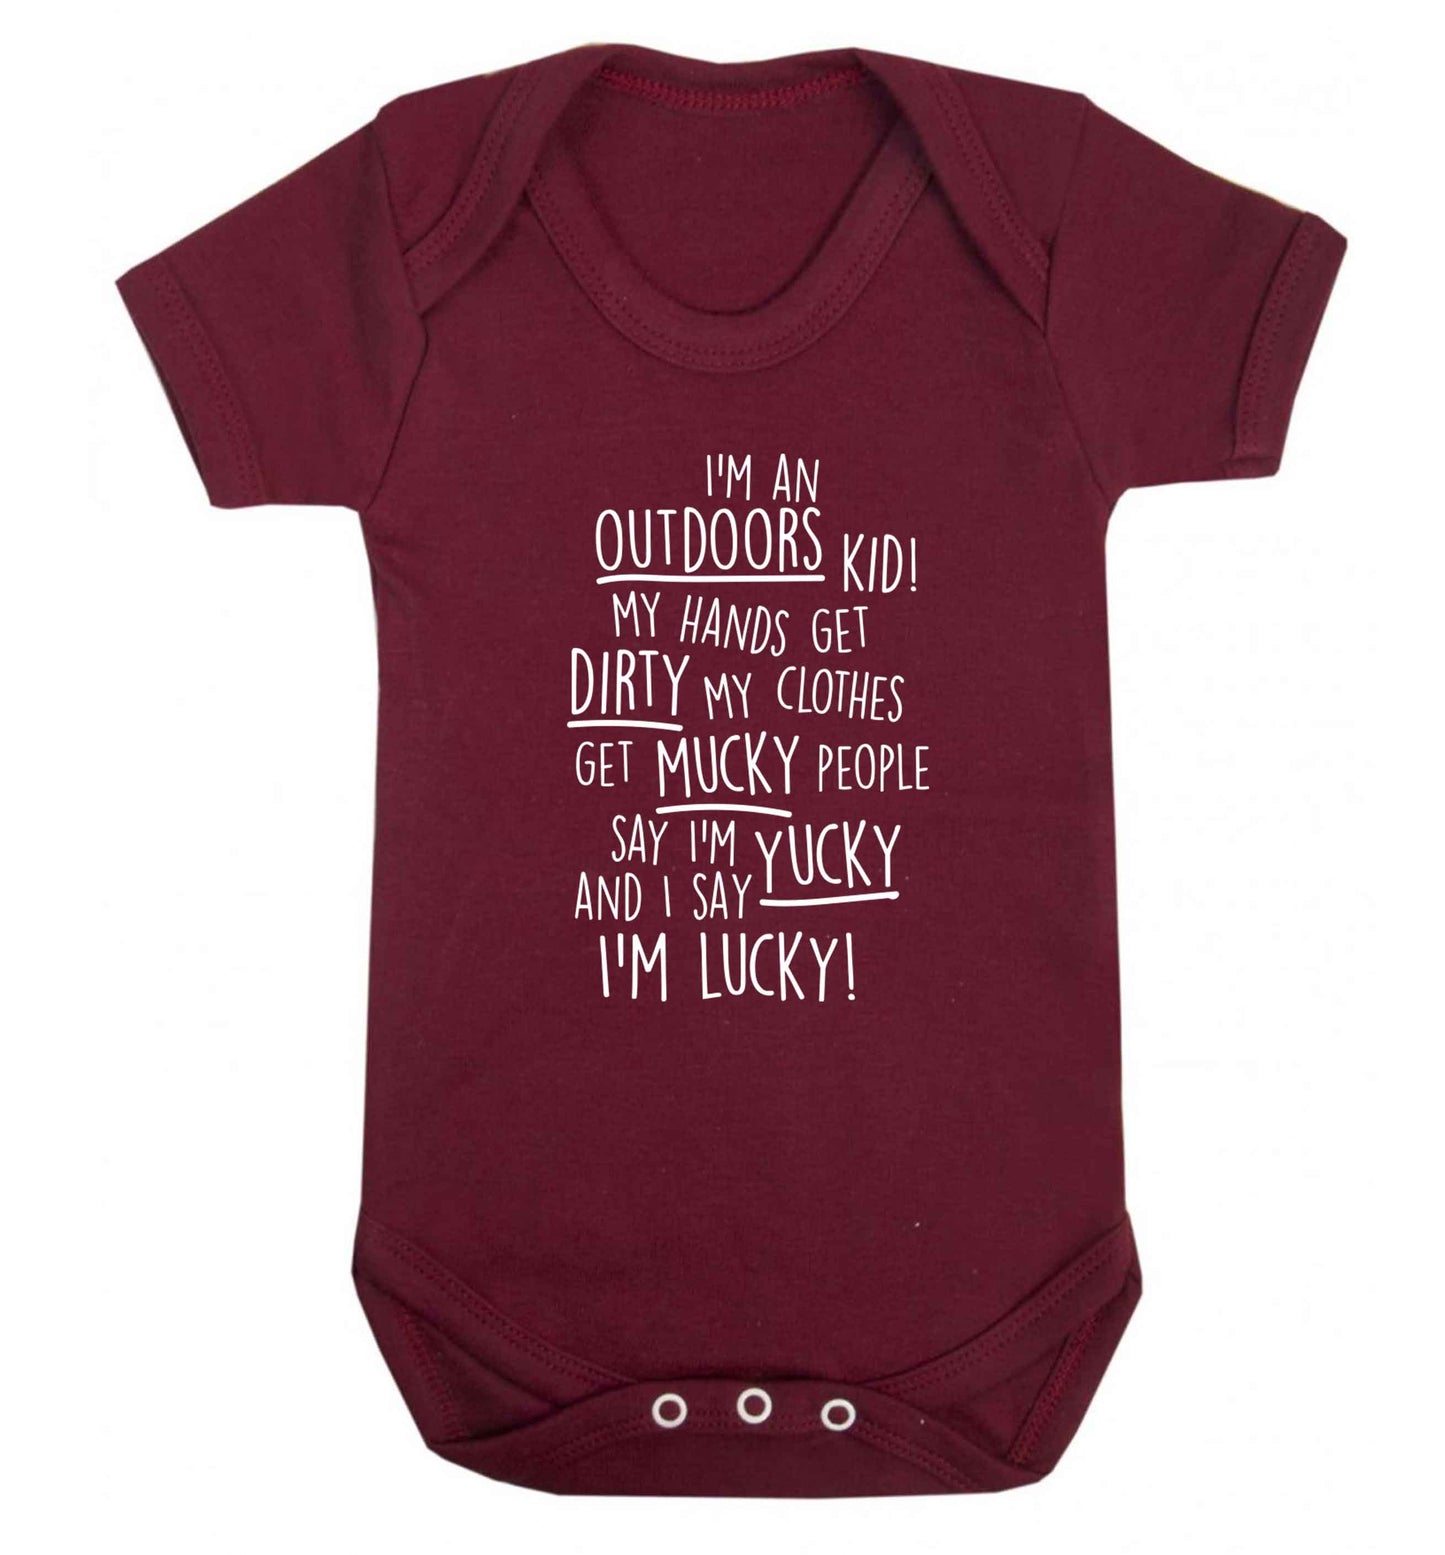 I'm an outdoors kid poem Baby Vest maroon 18-24 months